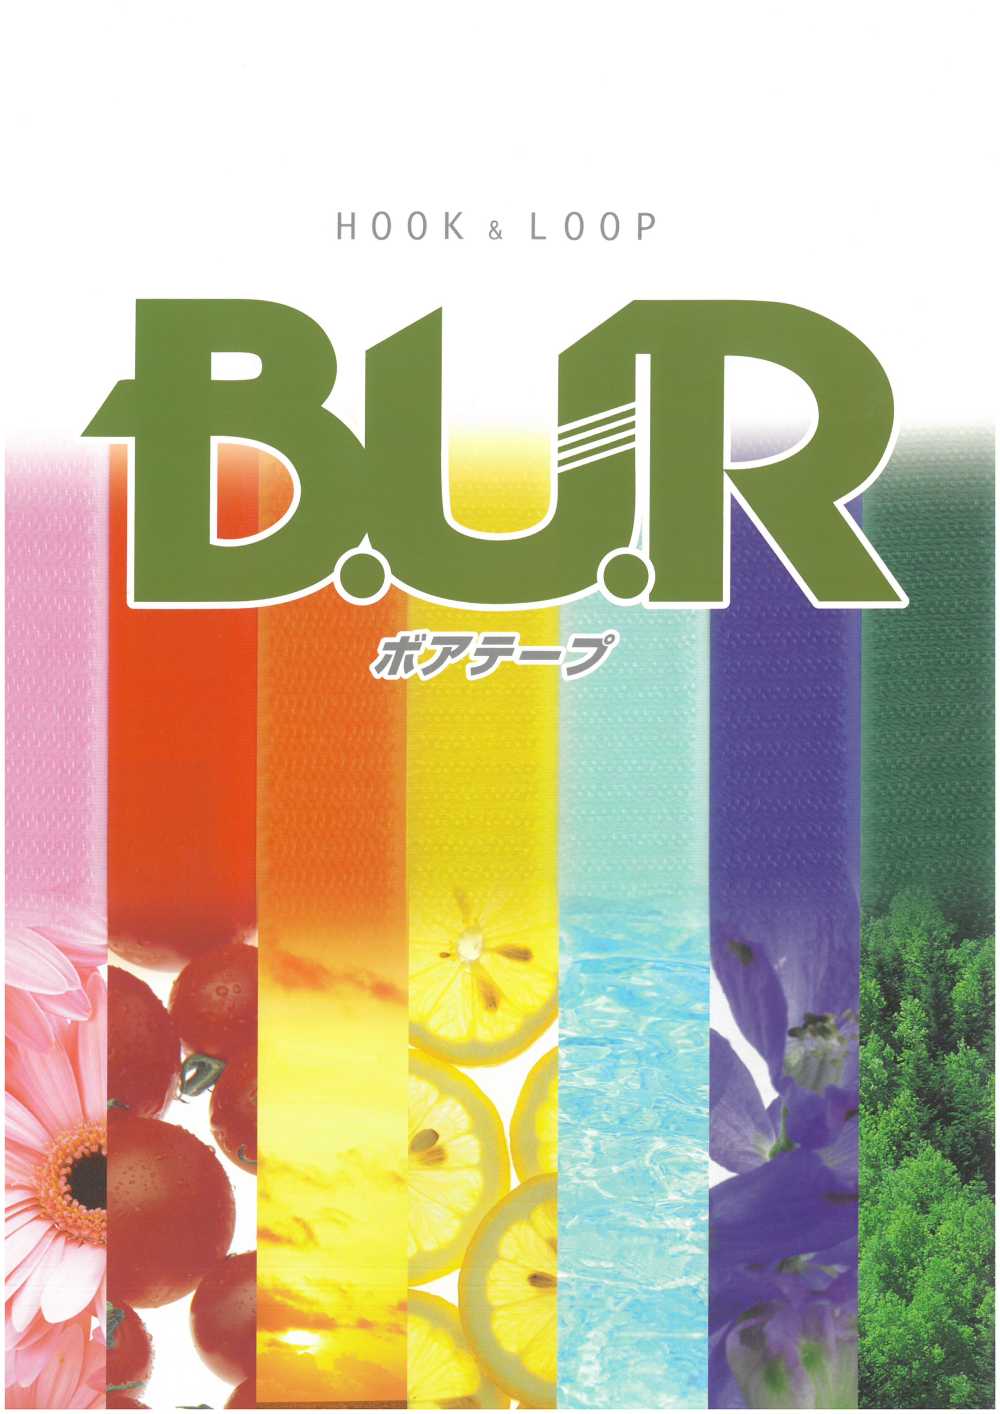 RA Boa Tape Hook And Loop A Side, Made Of Nylon, With Rubber Adhesive Type[Zipper] B.U.R.